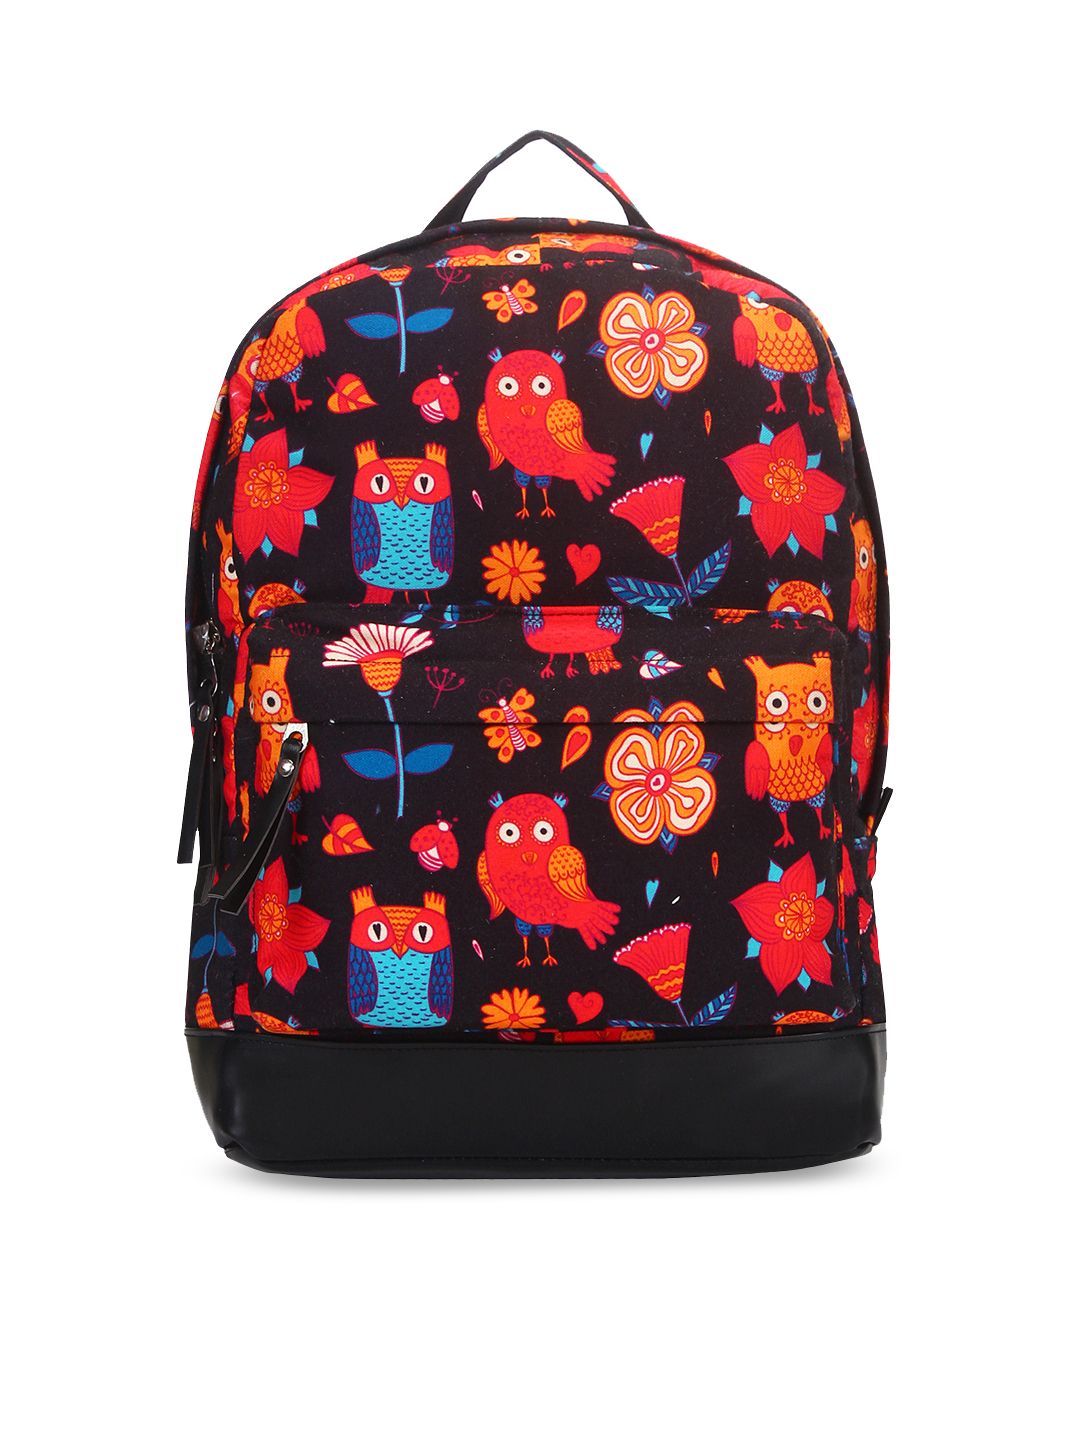 Anekaant Women Black & Red Backpack Price in India